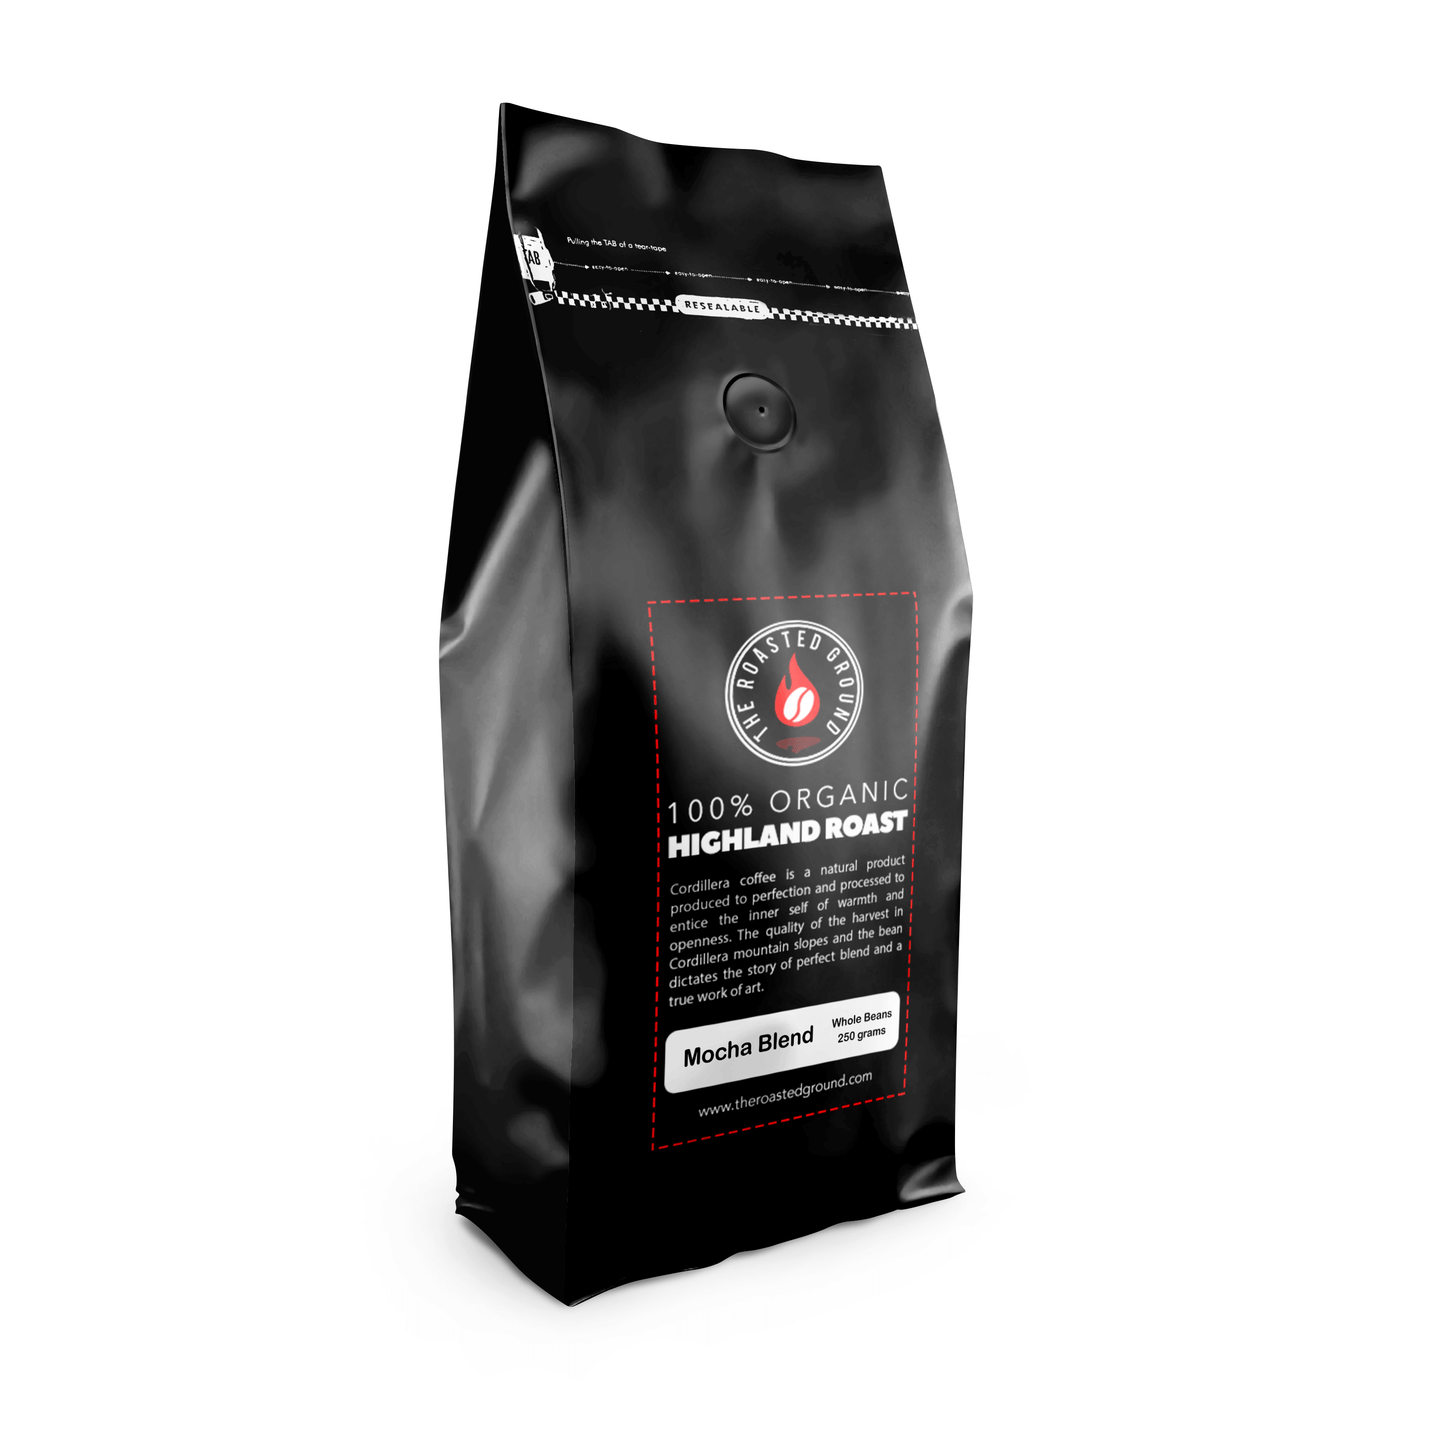 Mocha Blend - Premium Coffee (Whole Beans / Ground) - The Roasted Ground